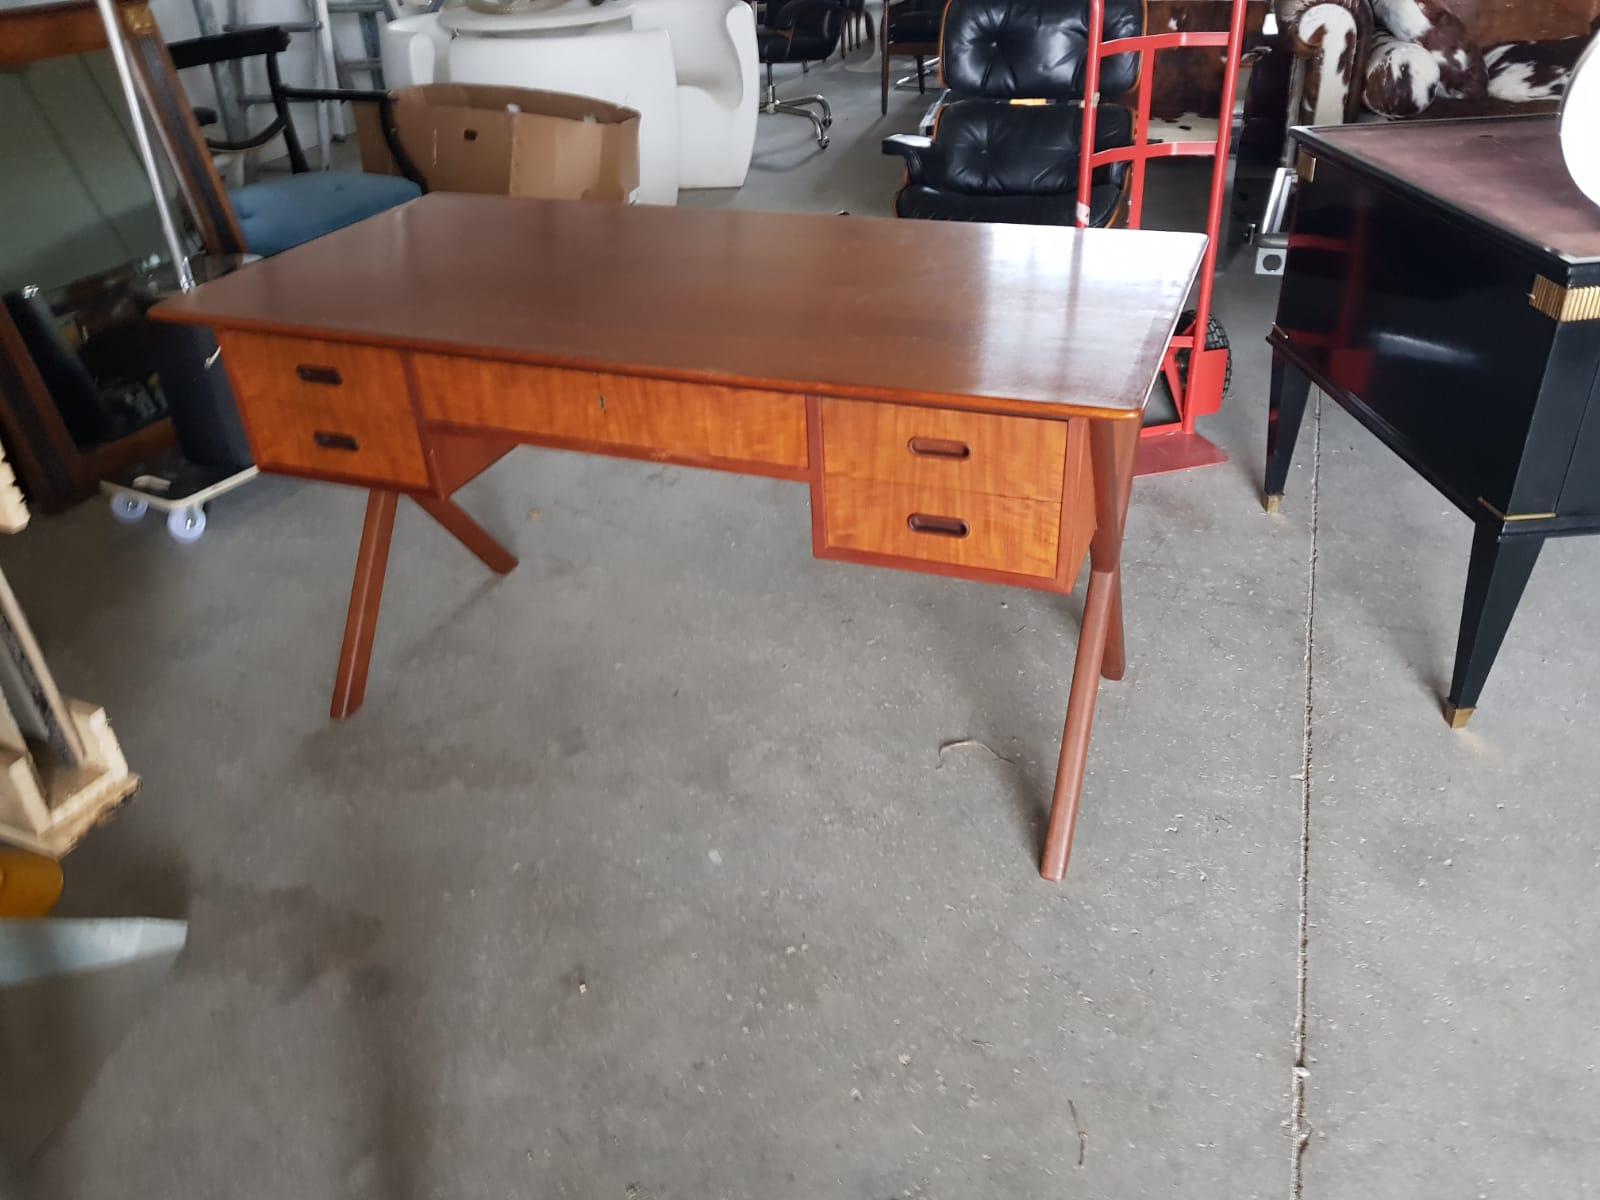 Mid century design teak wood desk with four drawers
Size: H 75 cm, W 140 cm, D 75 cm.
Good condition. Conservative restoration. Wears coherent with age and prior gentle use. 
A video is available upon request.